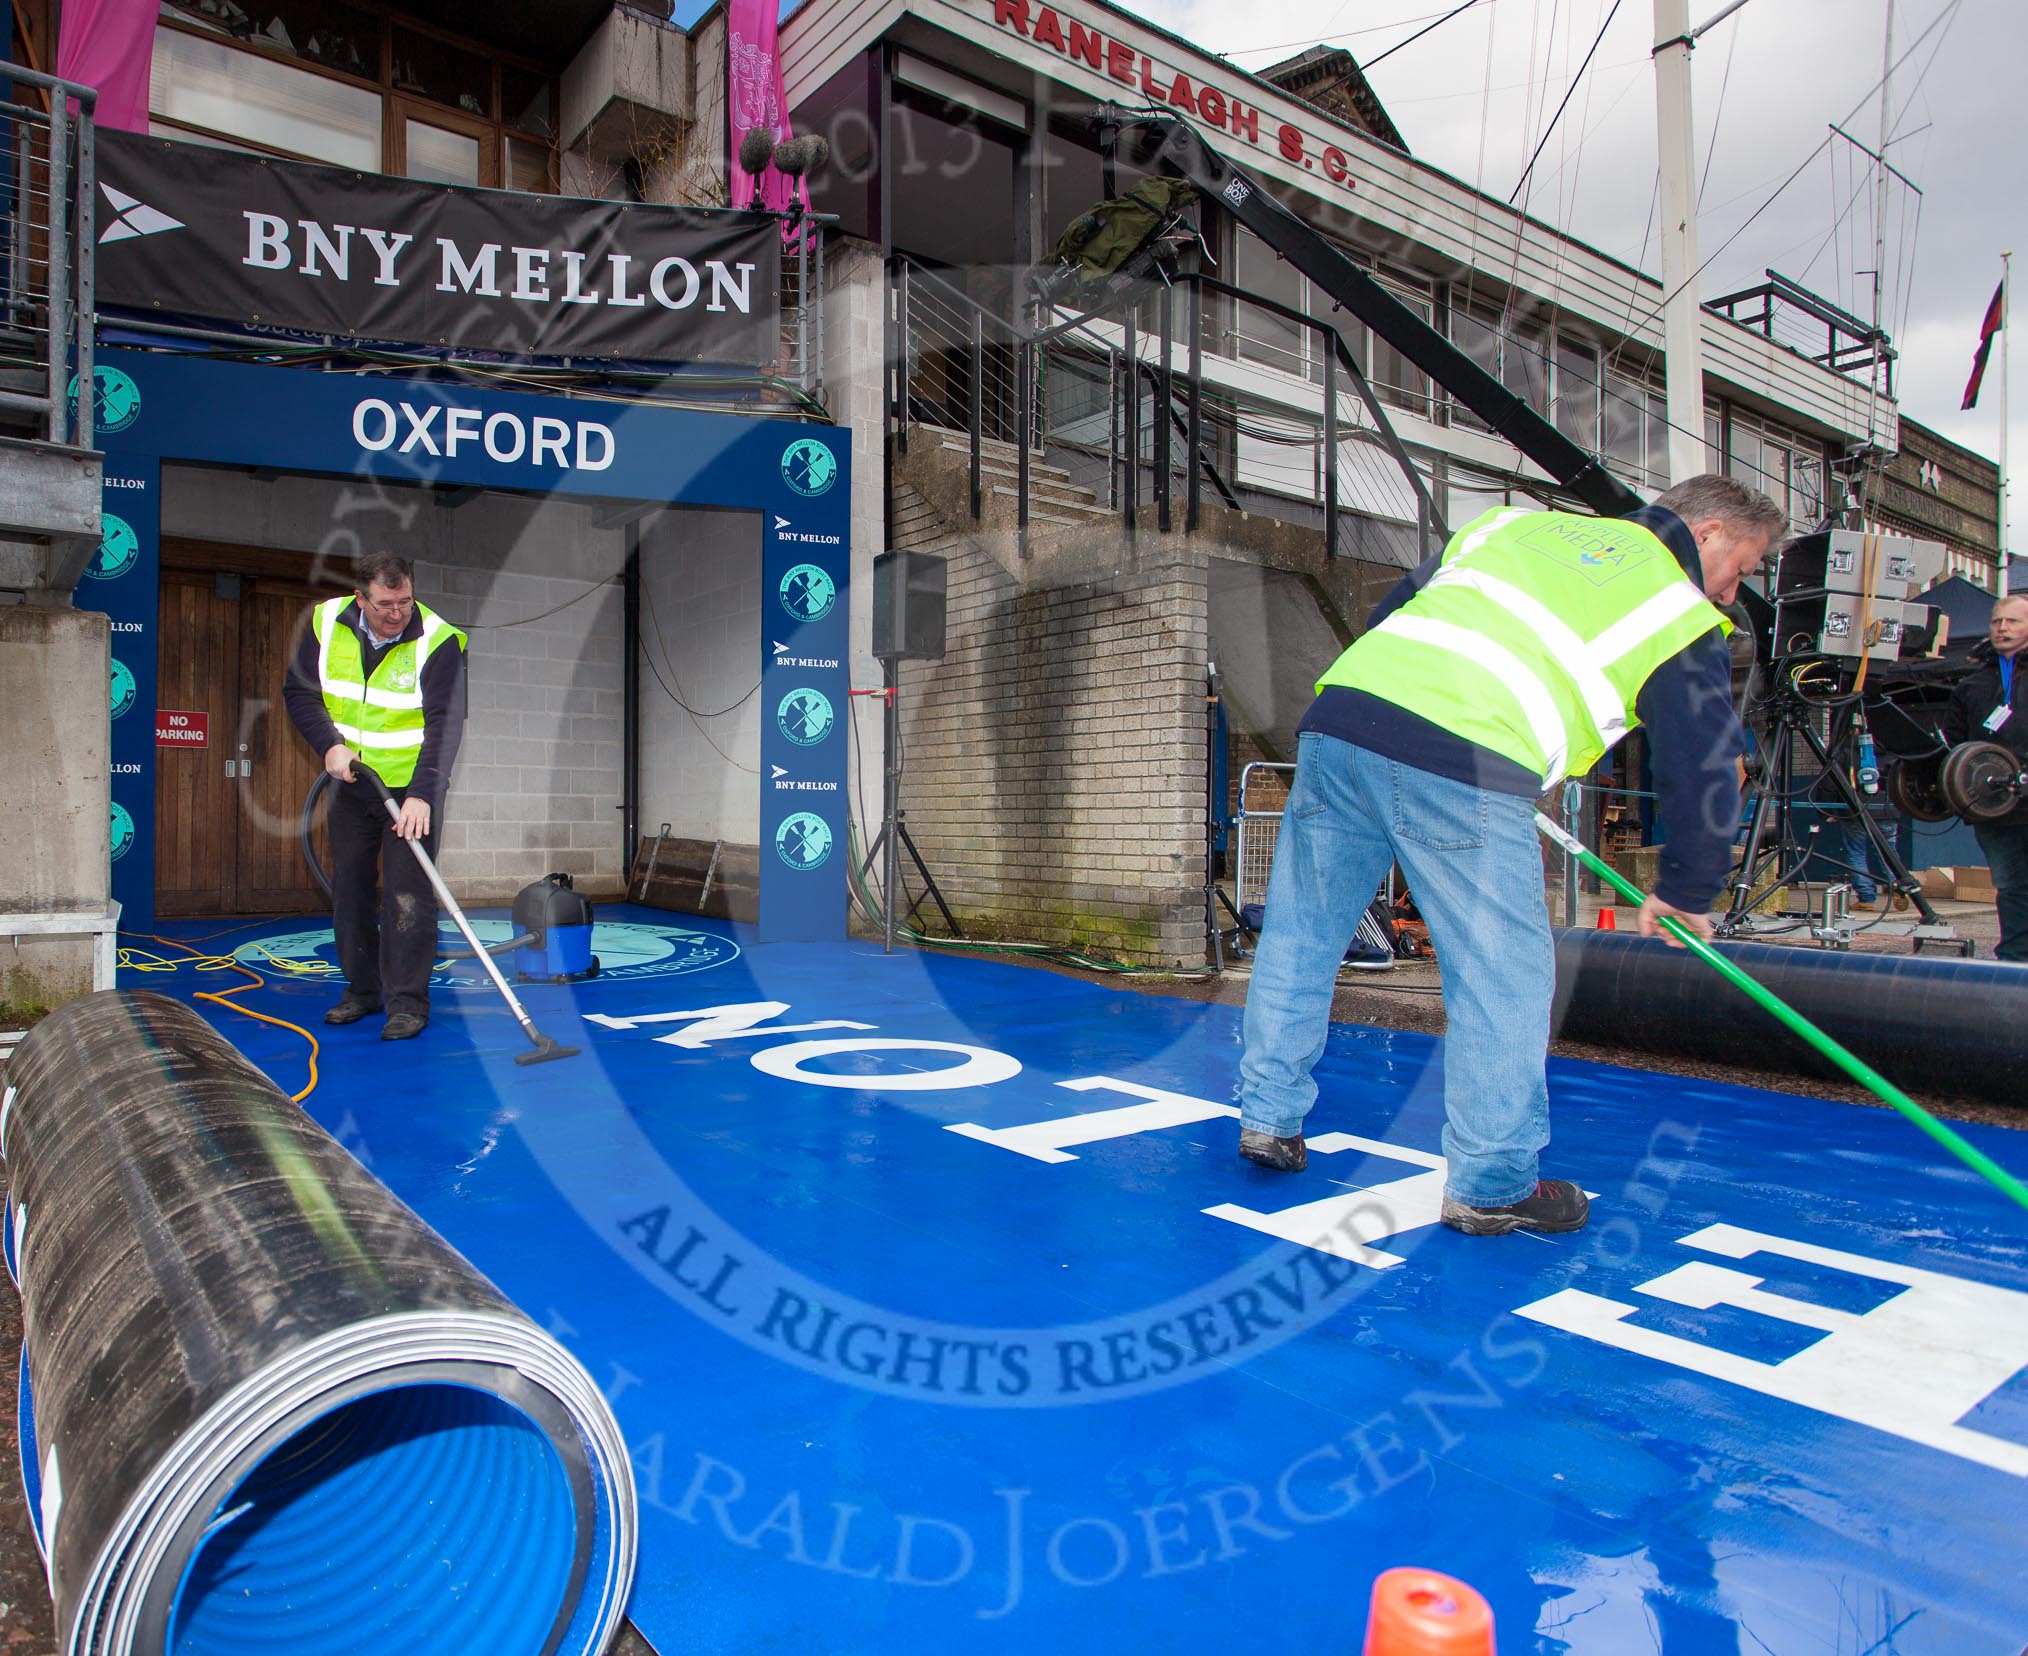 The Boat Race 2013: Cleaning the dark blue carpet for the Oxford squad, hours before the 2013 Boat Race..
Putney,
London SW15,

United Kingdom,
on 31 March 2013 at 11:06, image #5